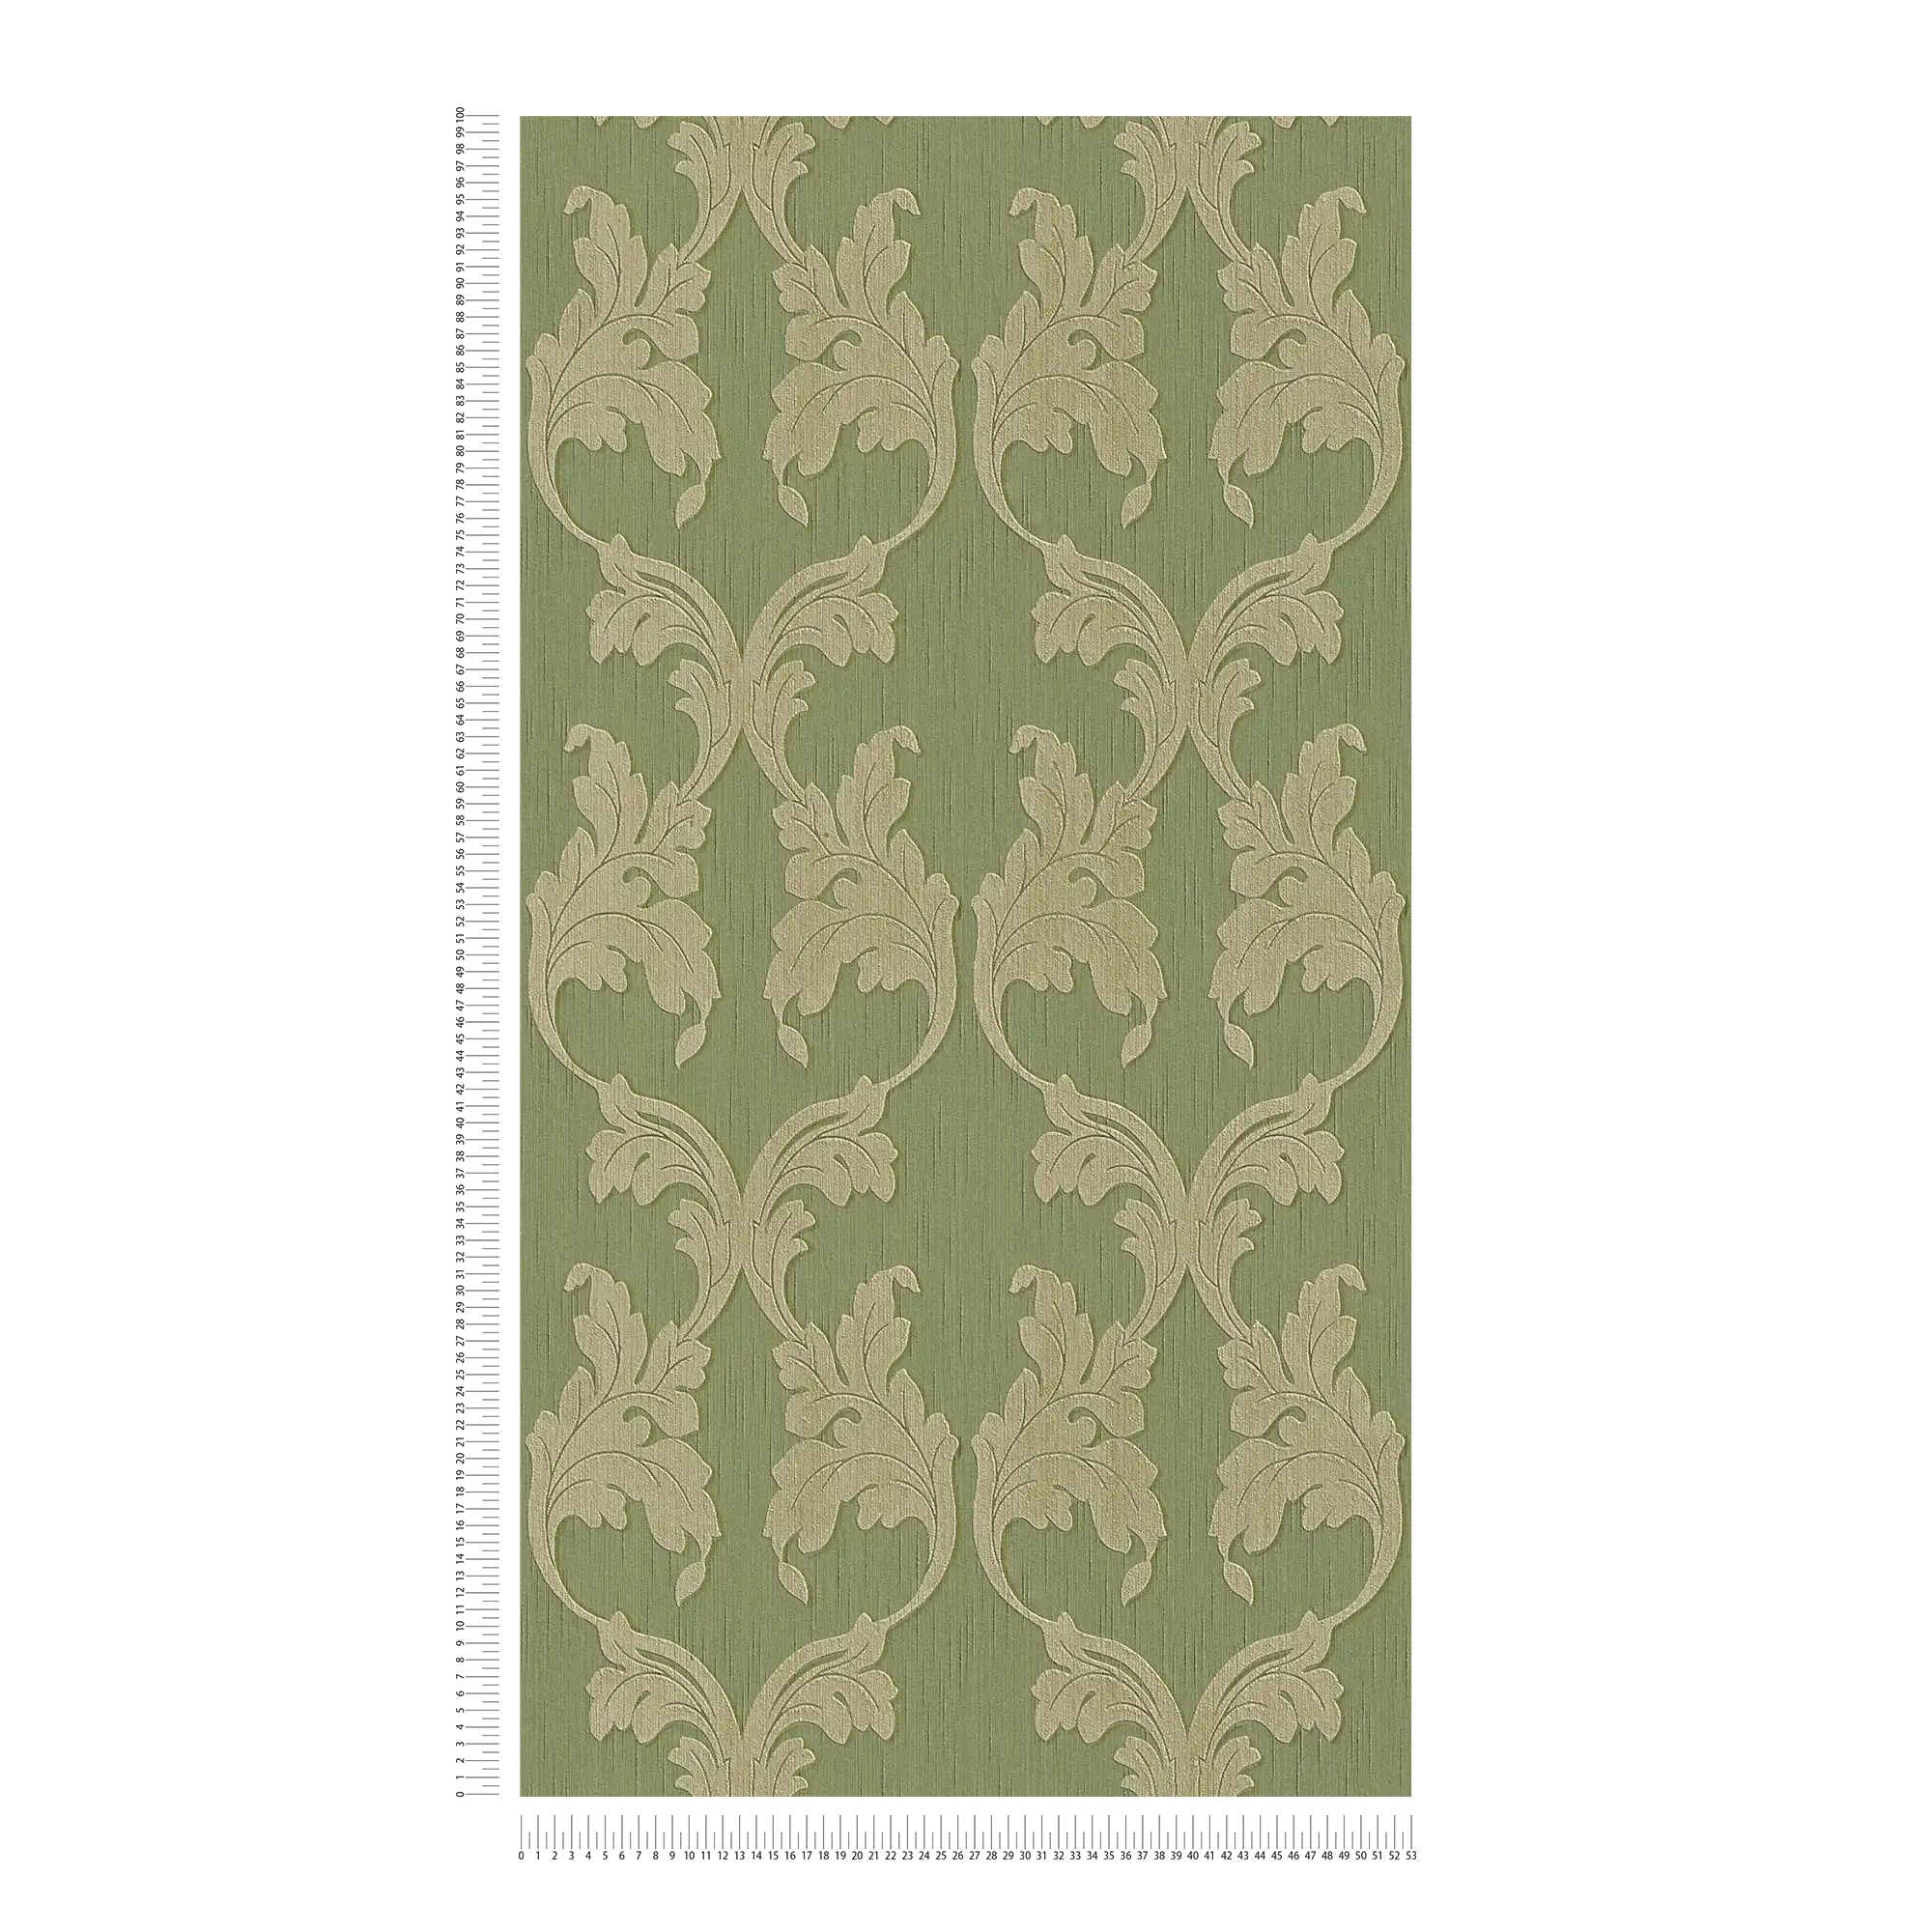             Wallpaper with ornamental vines & textured pattern - green
        